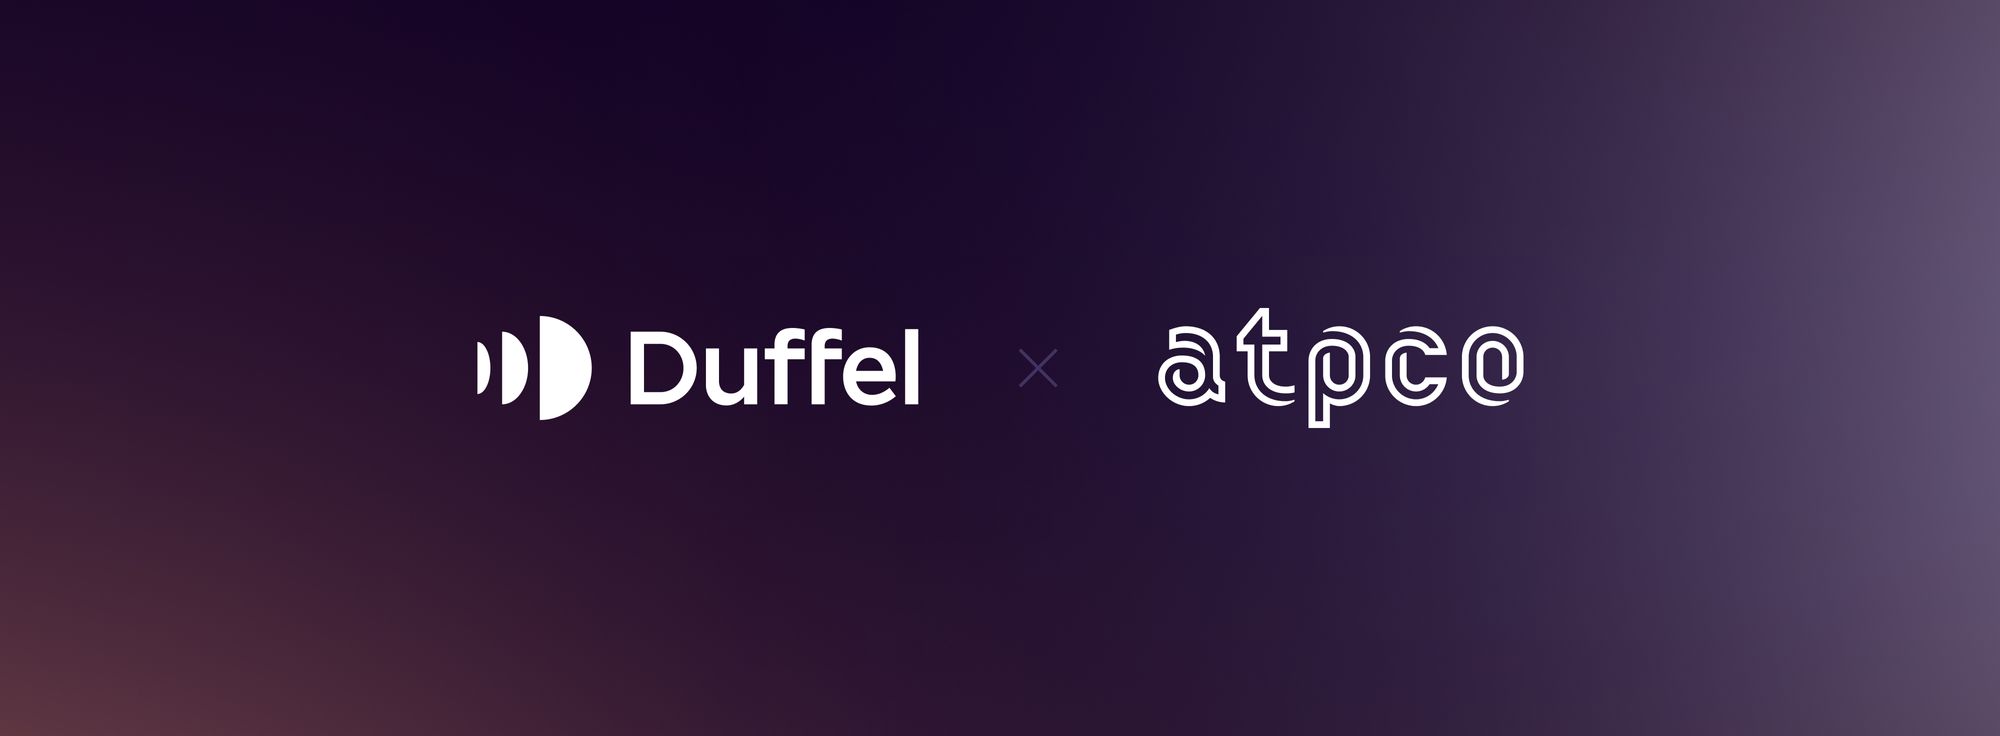 Duffel and ATPCO logo on a gradient background.